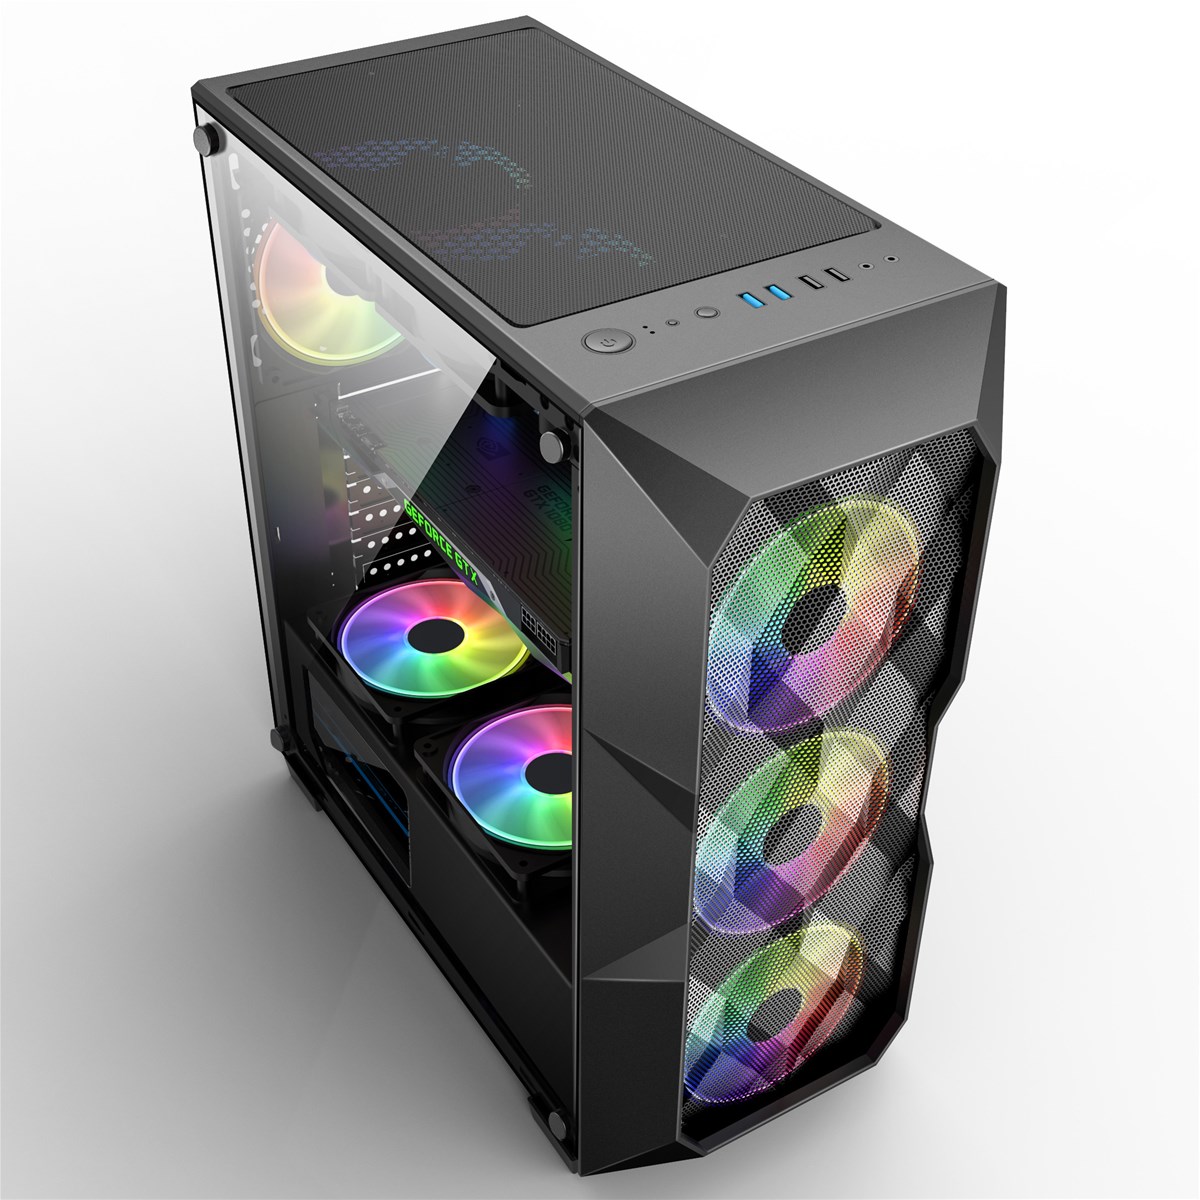 RGB 12025 cooling fan for EATX Gaming PC Gamer Computer Case Cabinet Hardware